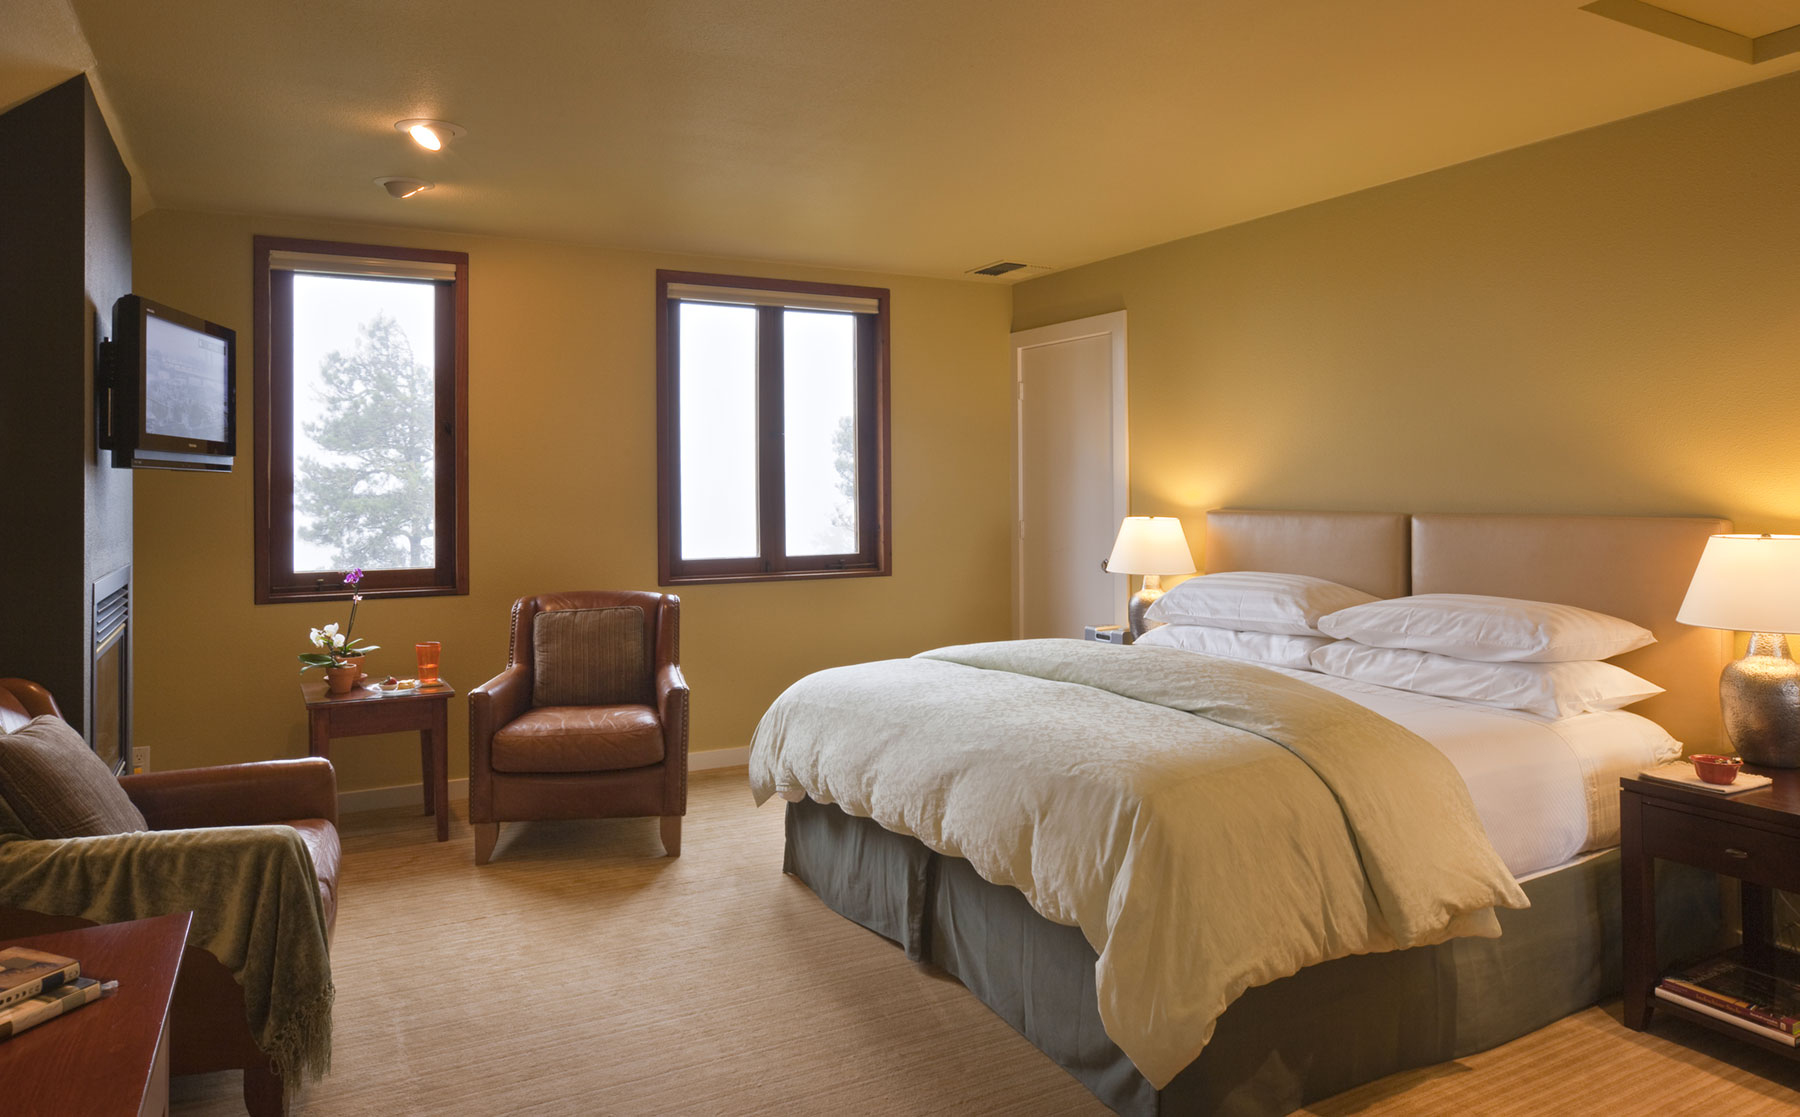 The Smuggler's Cove room has a king featherbed, leather armchairs, flat screen TV, and fireplace.